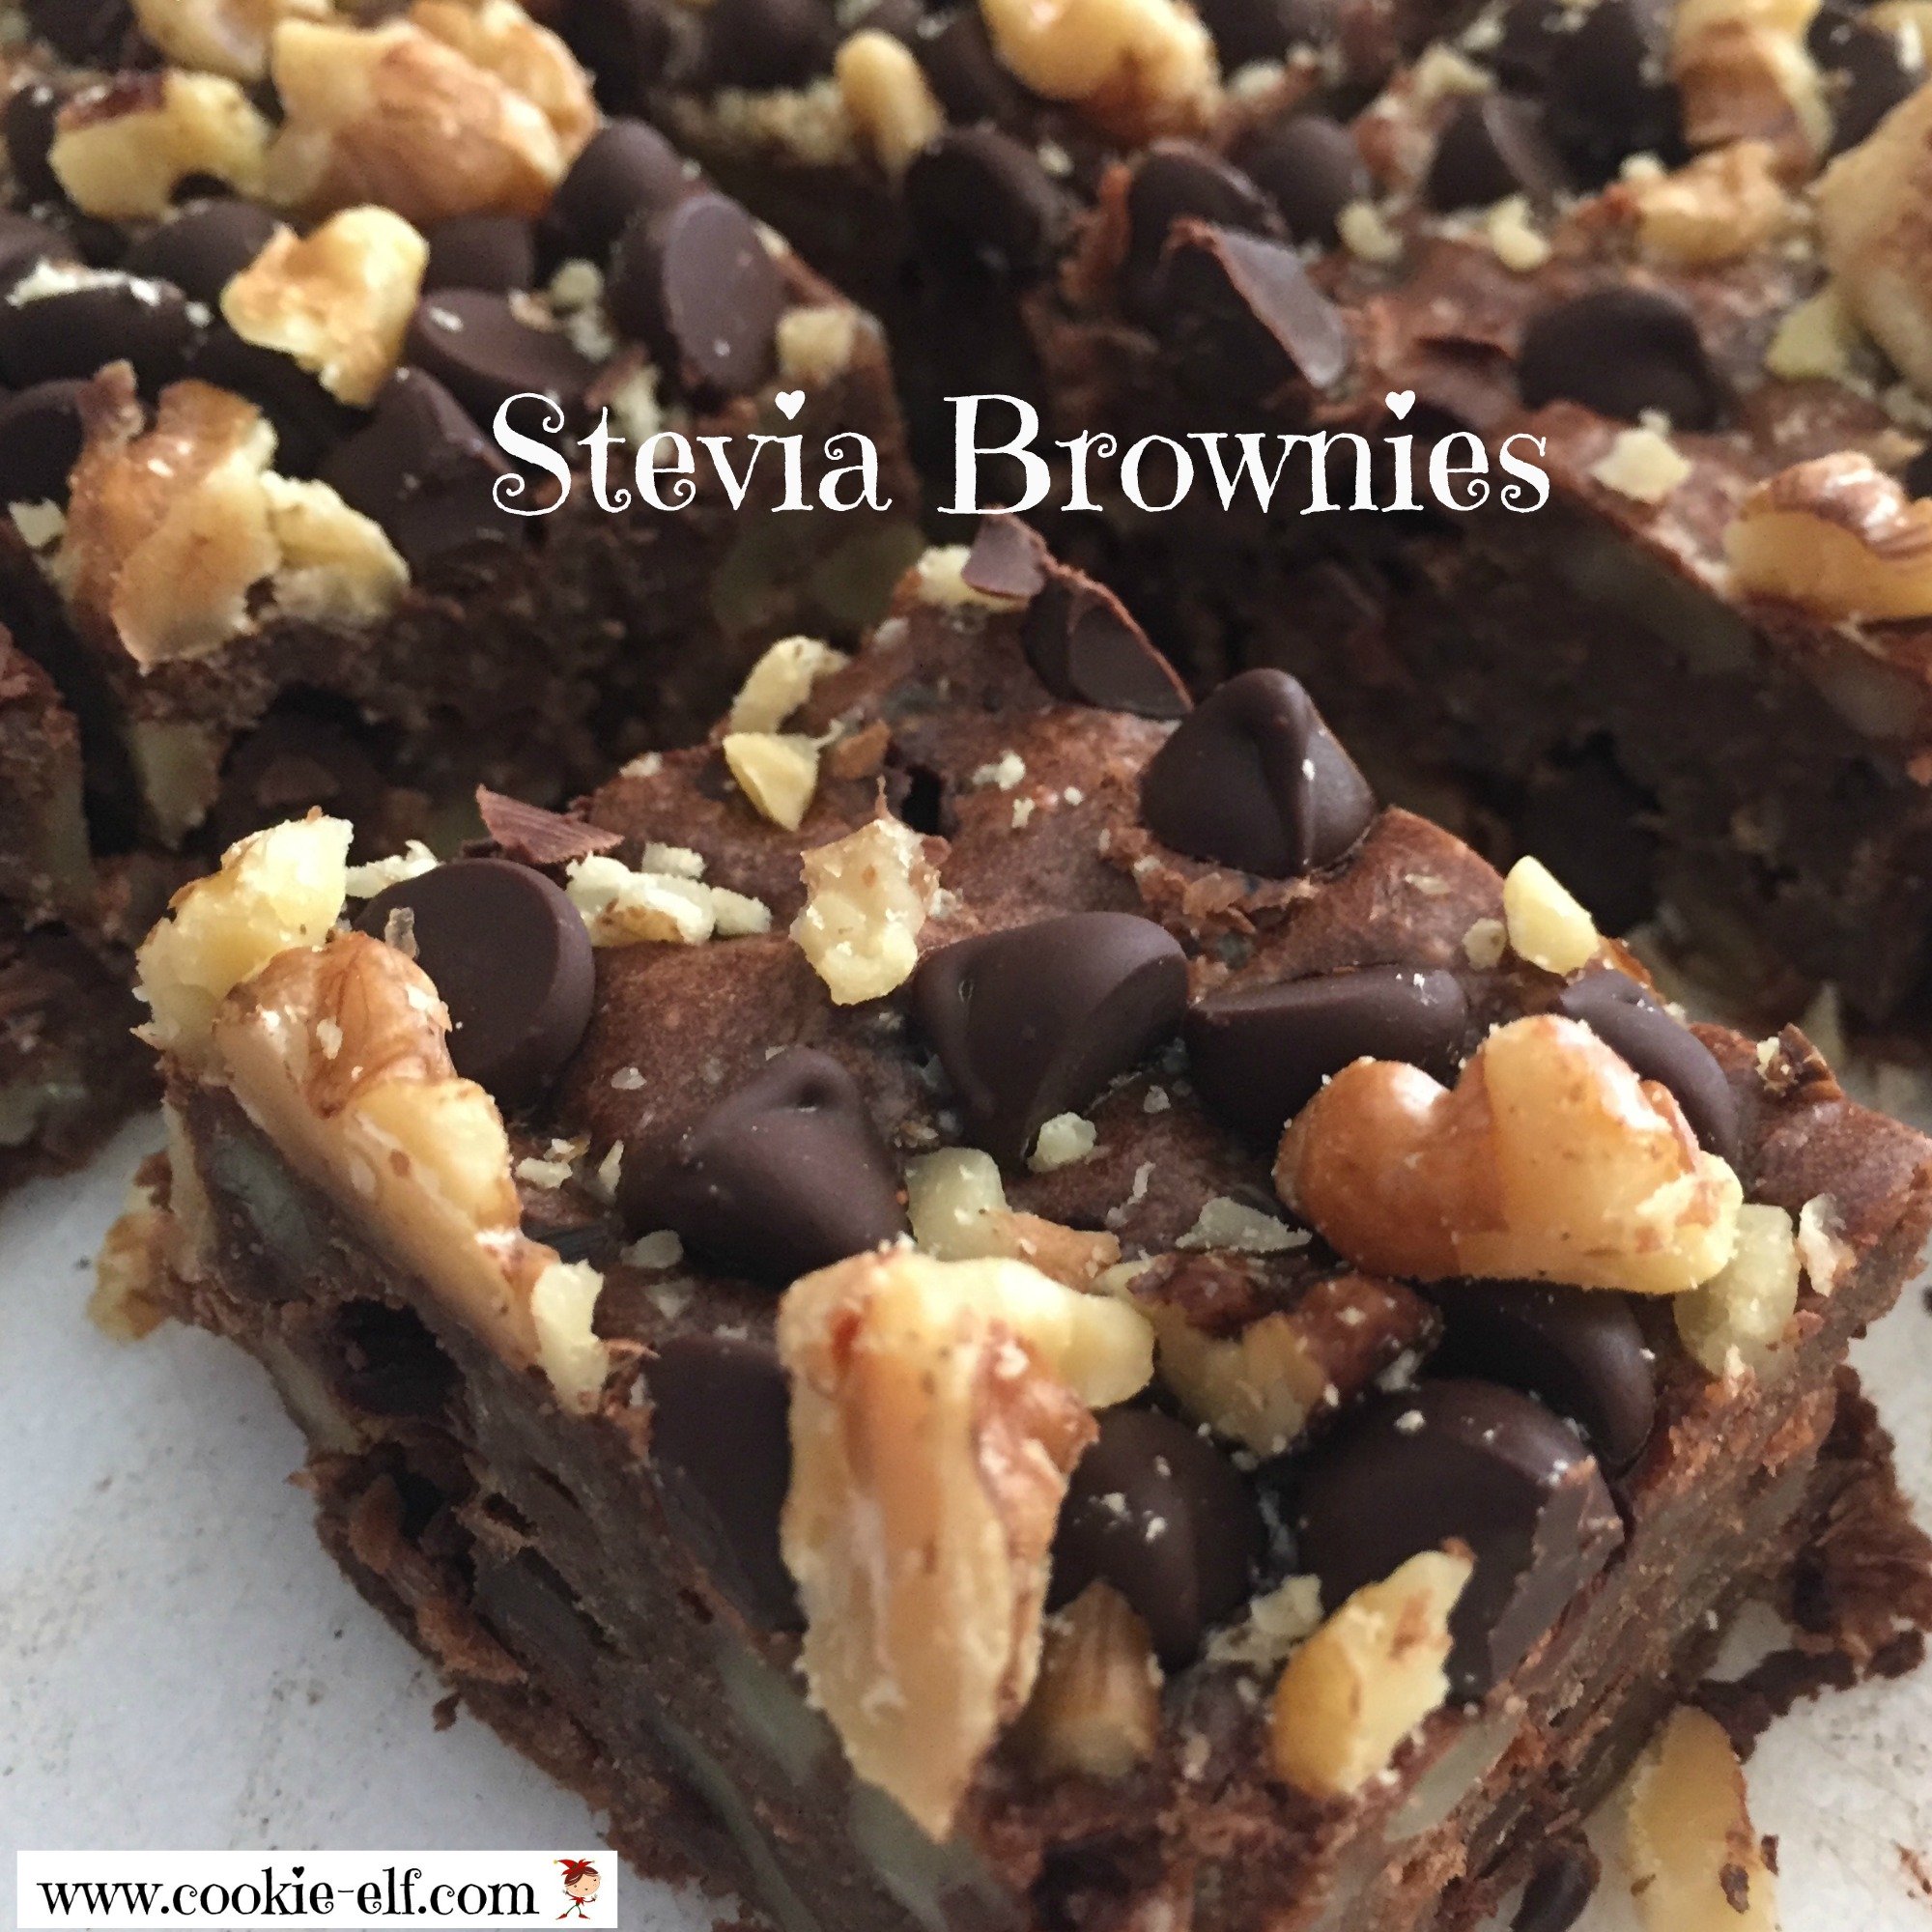 Stevia Brownies from The Cookie Elf